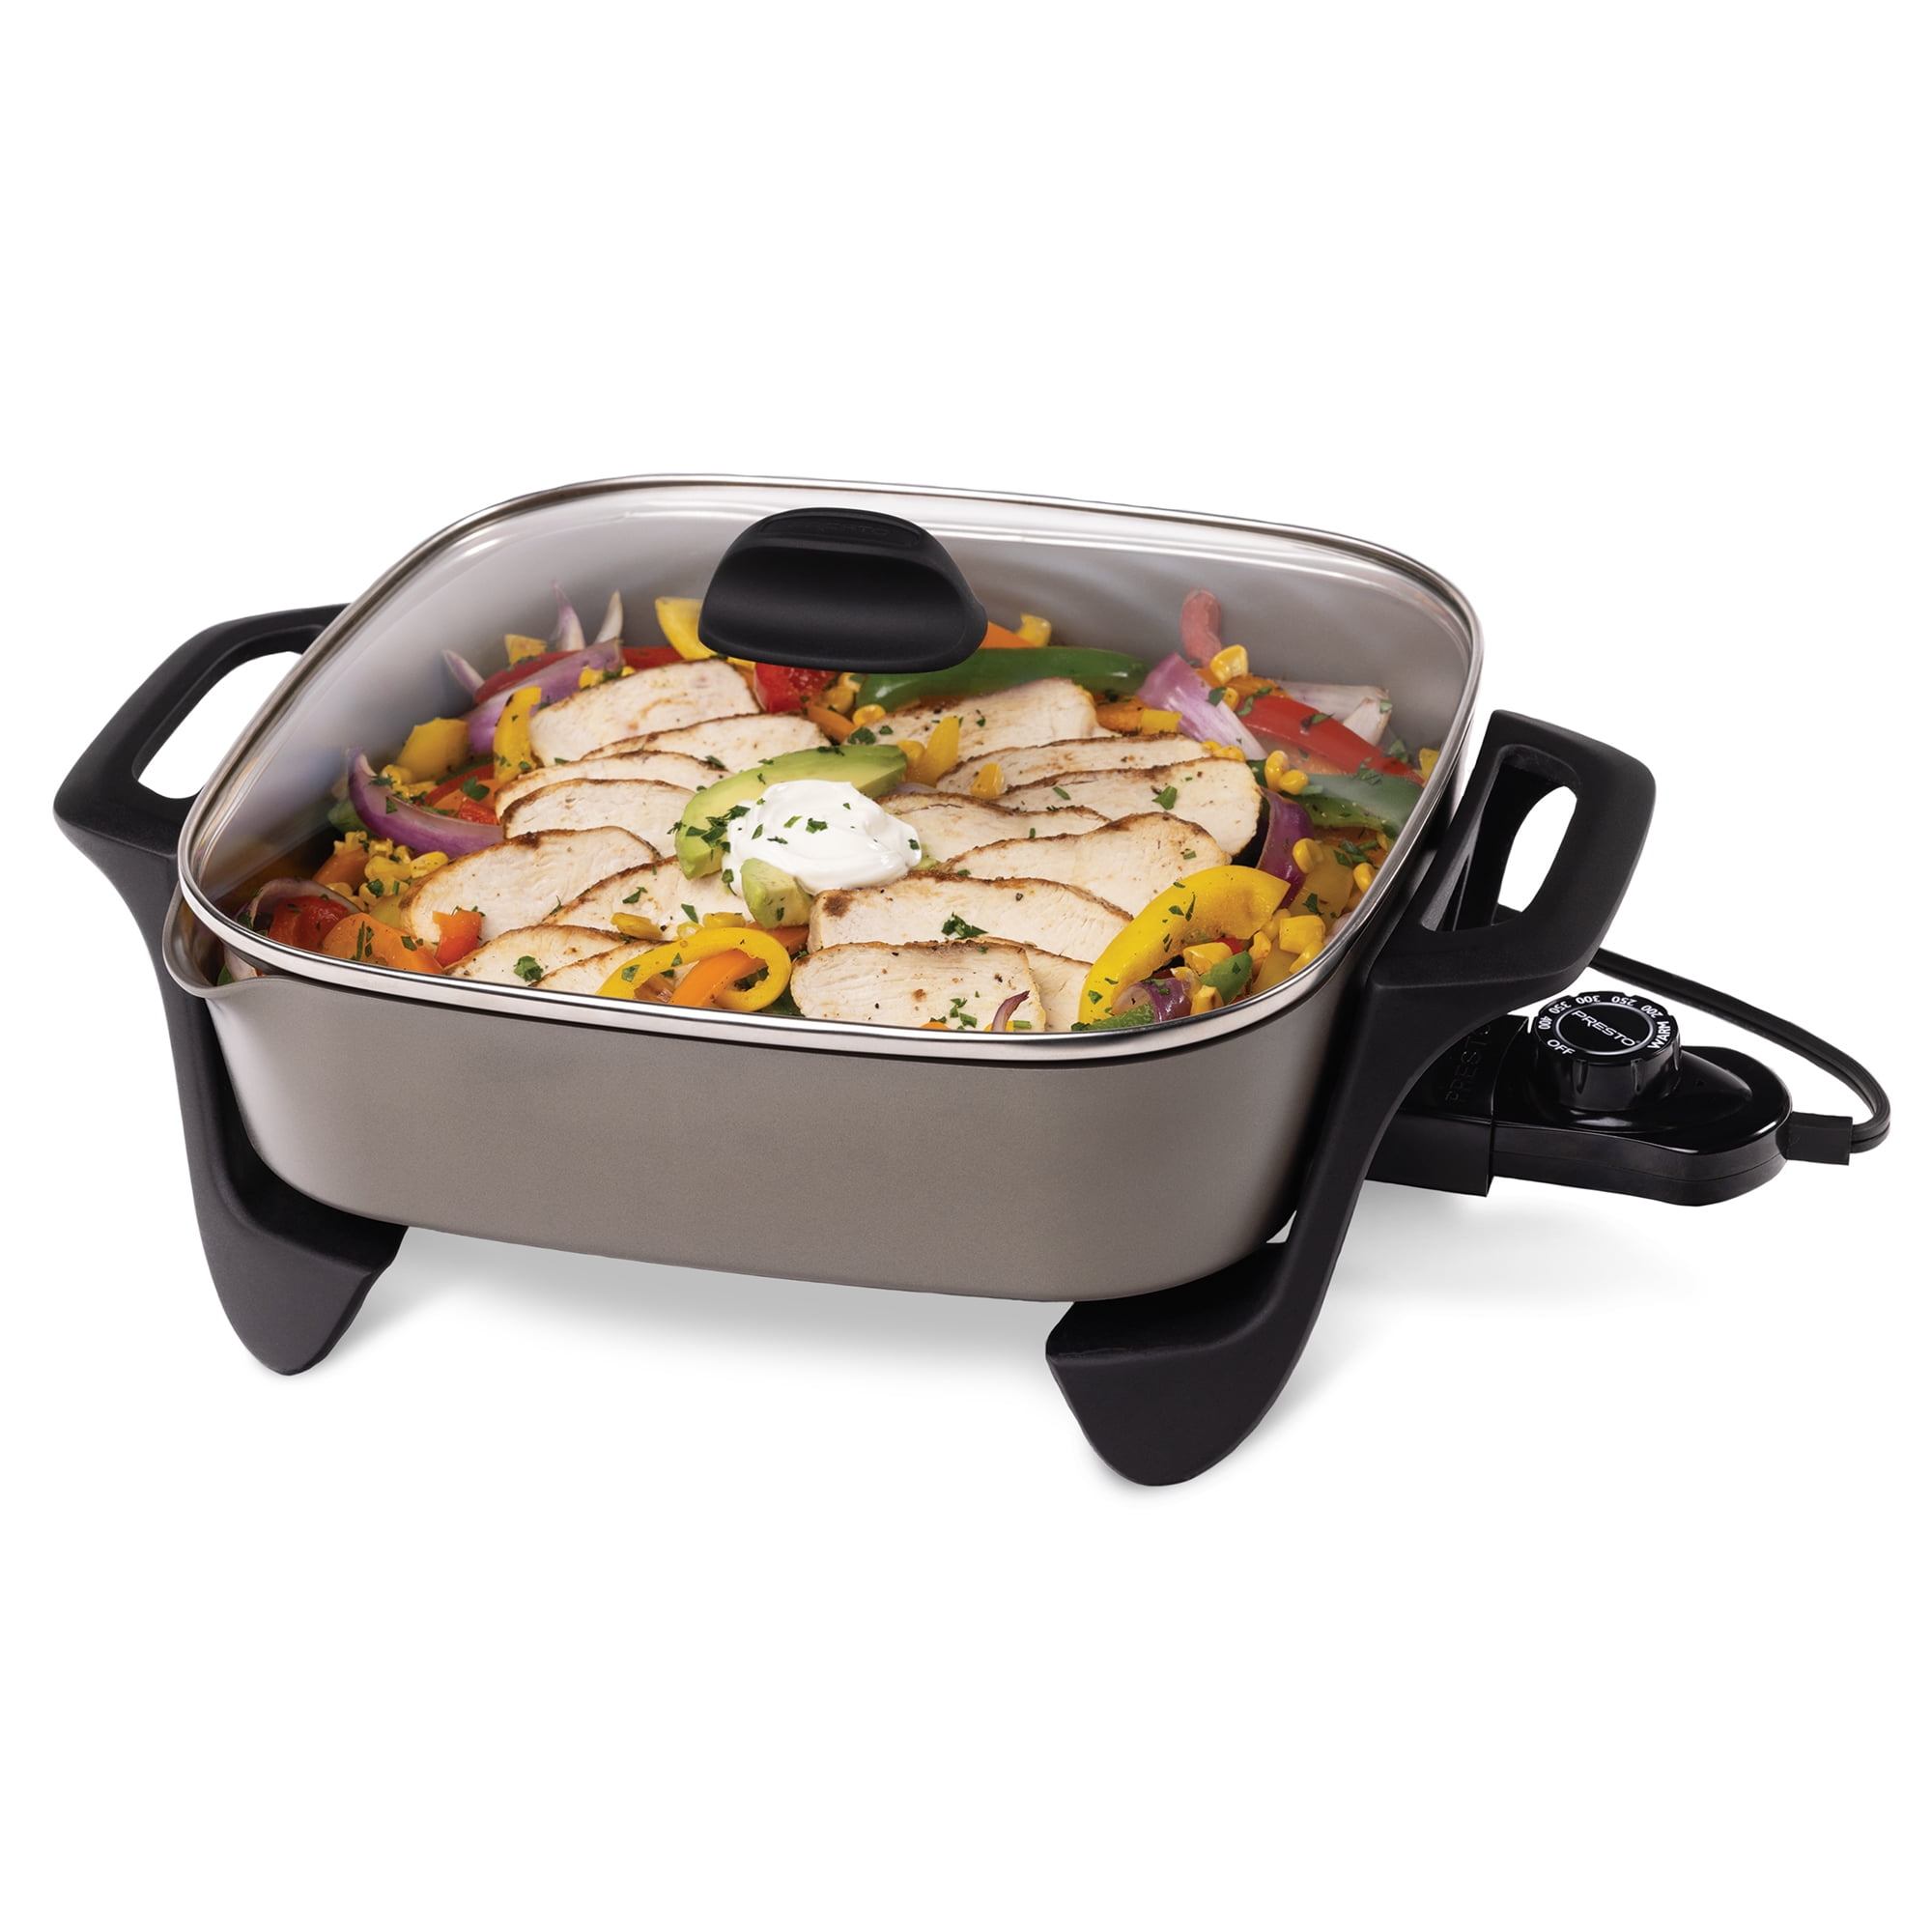 West Bend 12-Inch Family-Sized Electric Skillet with Diamond Shield  Scratch-Resistant, Non-Stick Coating, in Gray (SKWB12GY13)